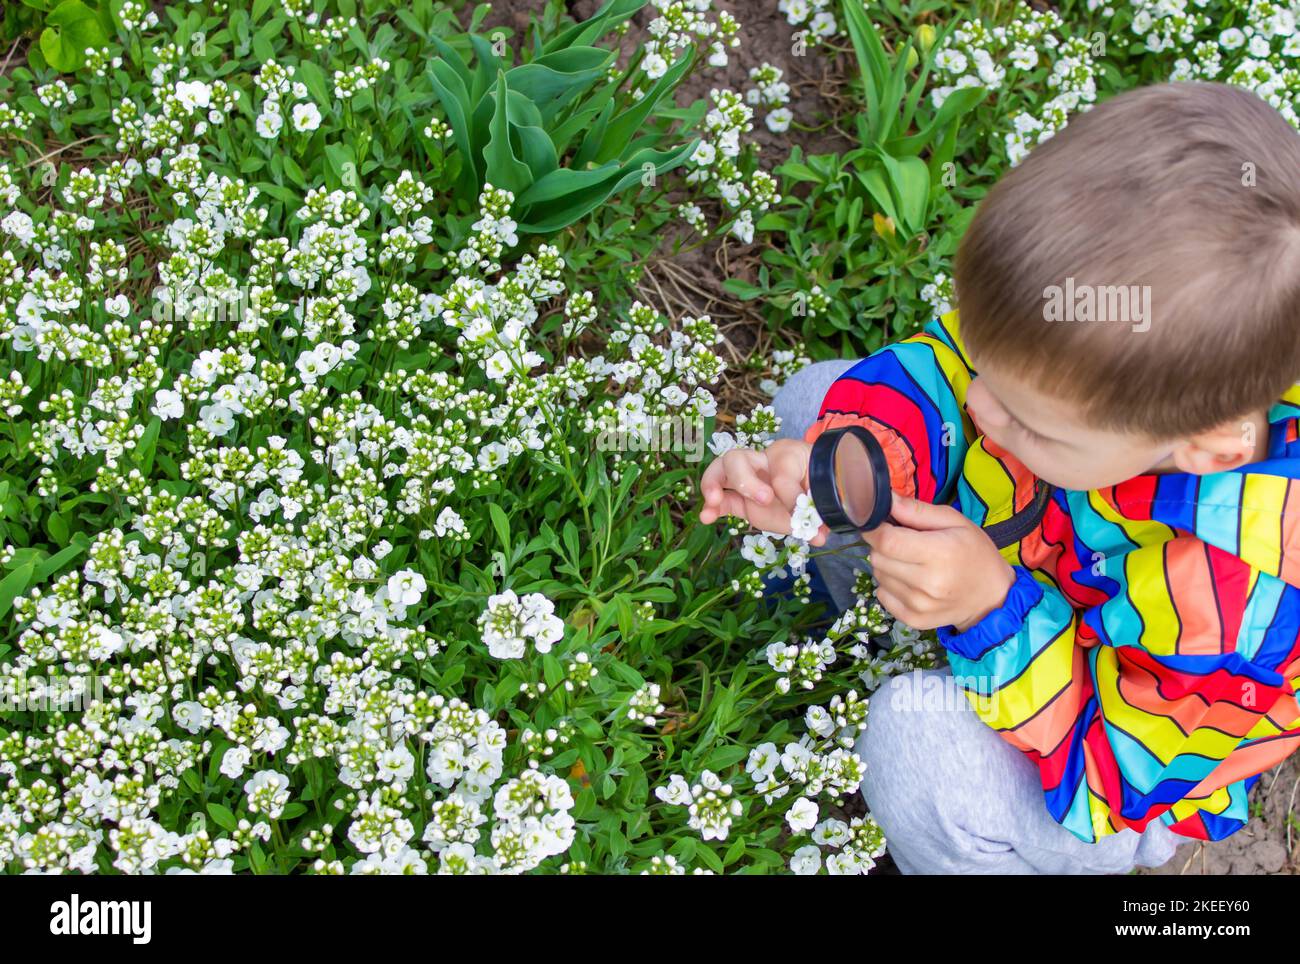 The child looks through a magnifying glass at the flowers Zoom in. selective focus. Stock Photo